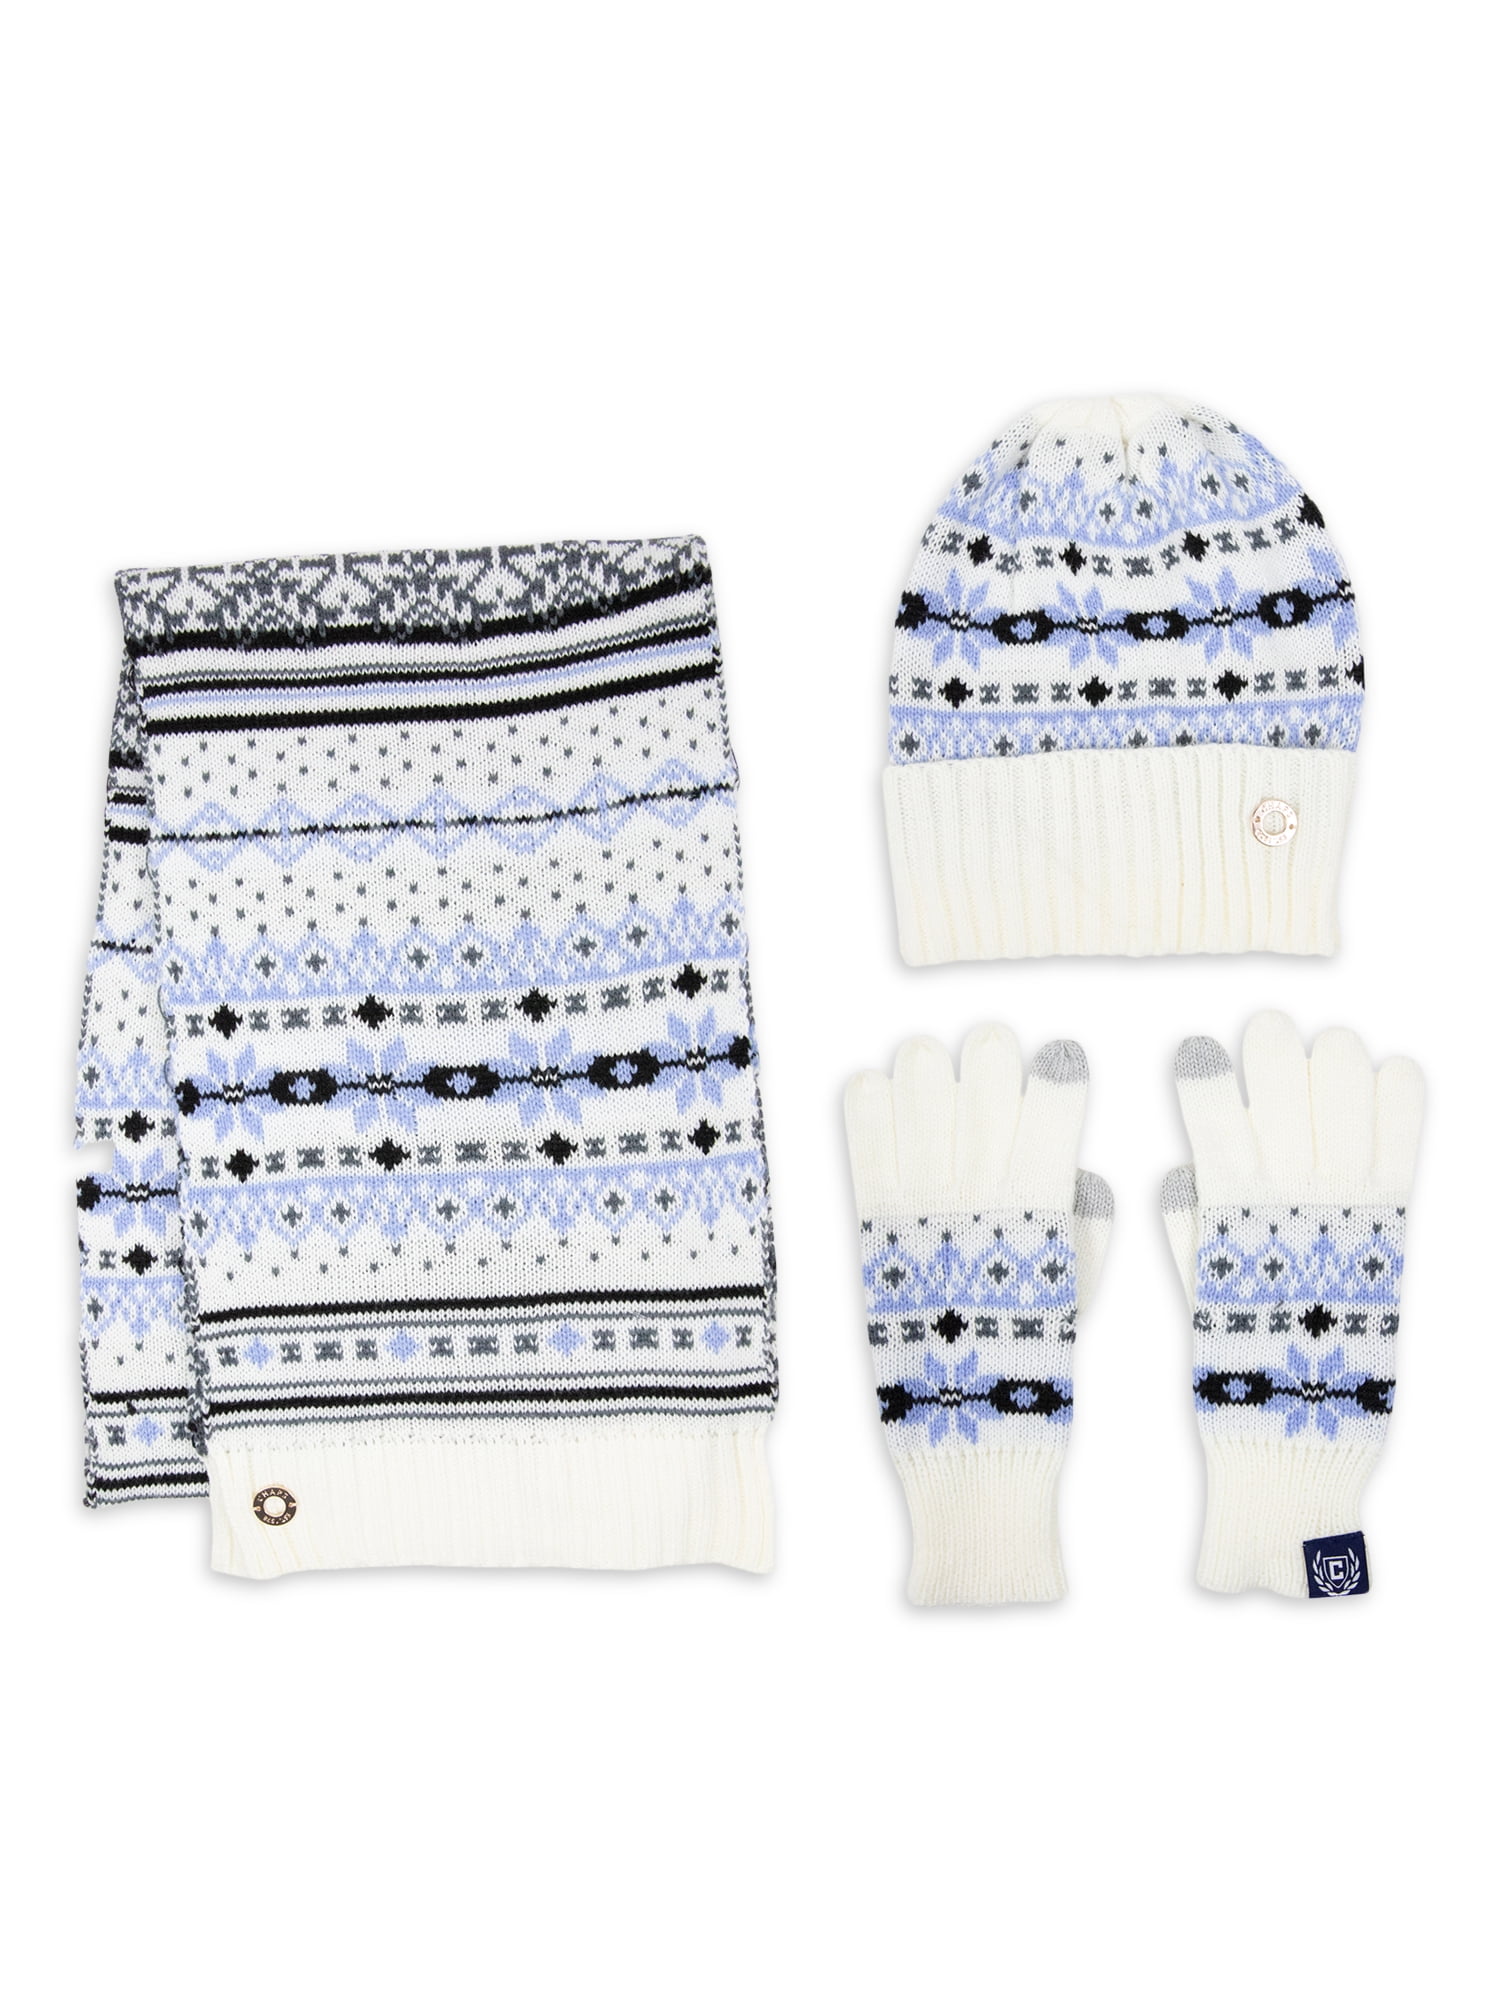 Chaps Brand Women's Fairisle Knit 3 Piece Scarf, Beanie Style Hat and Glove  Set, Adult